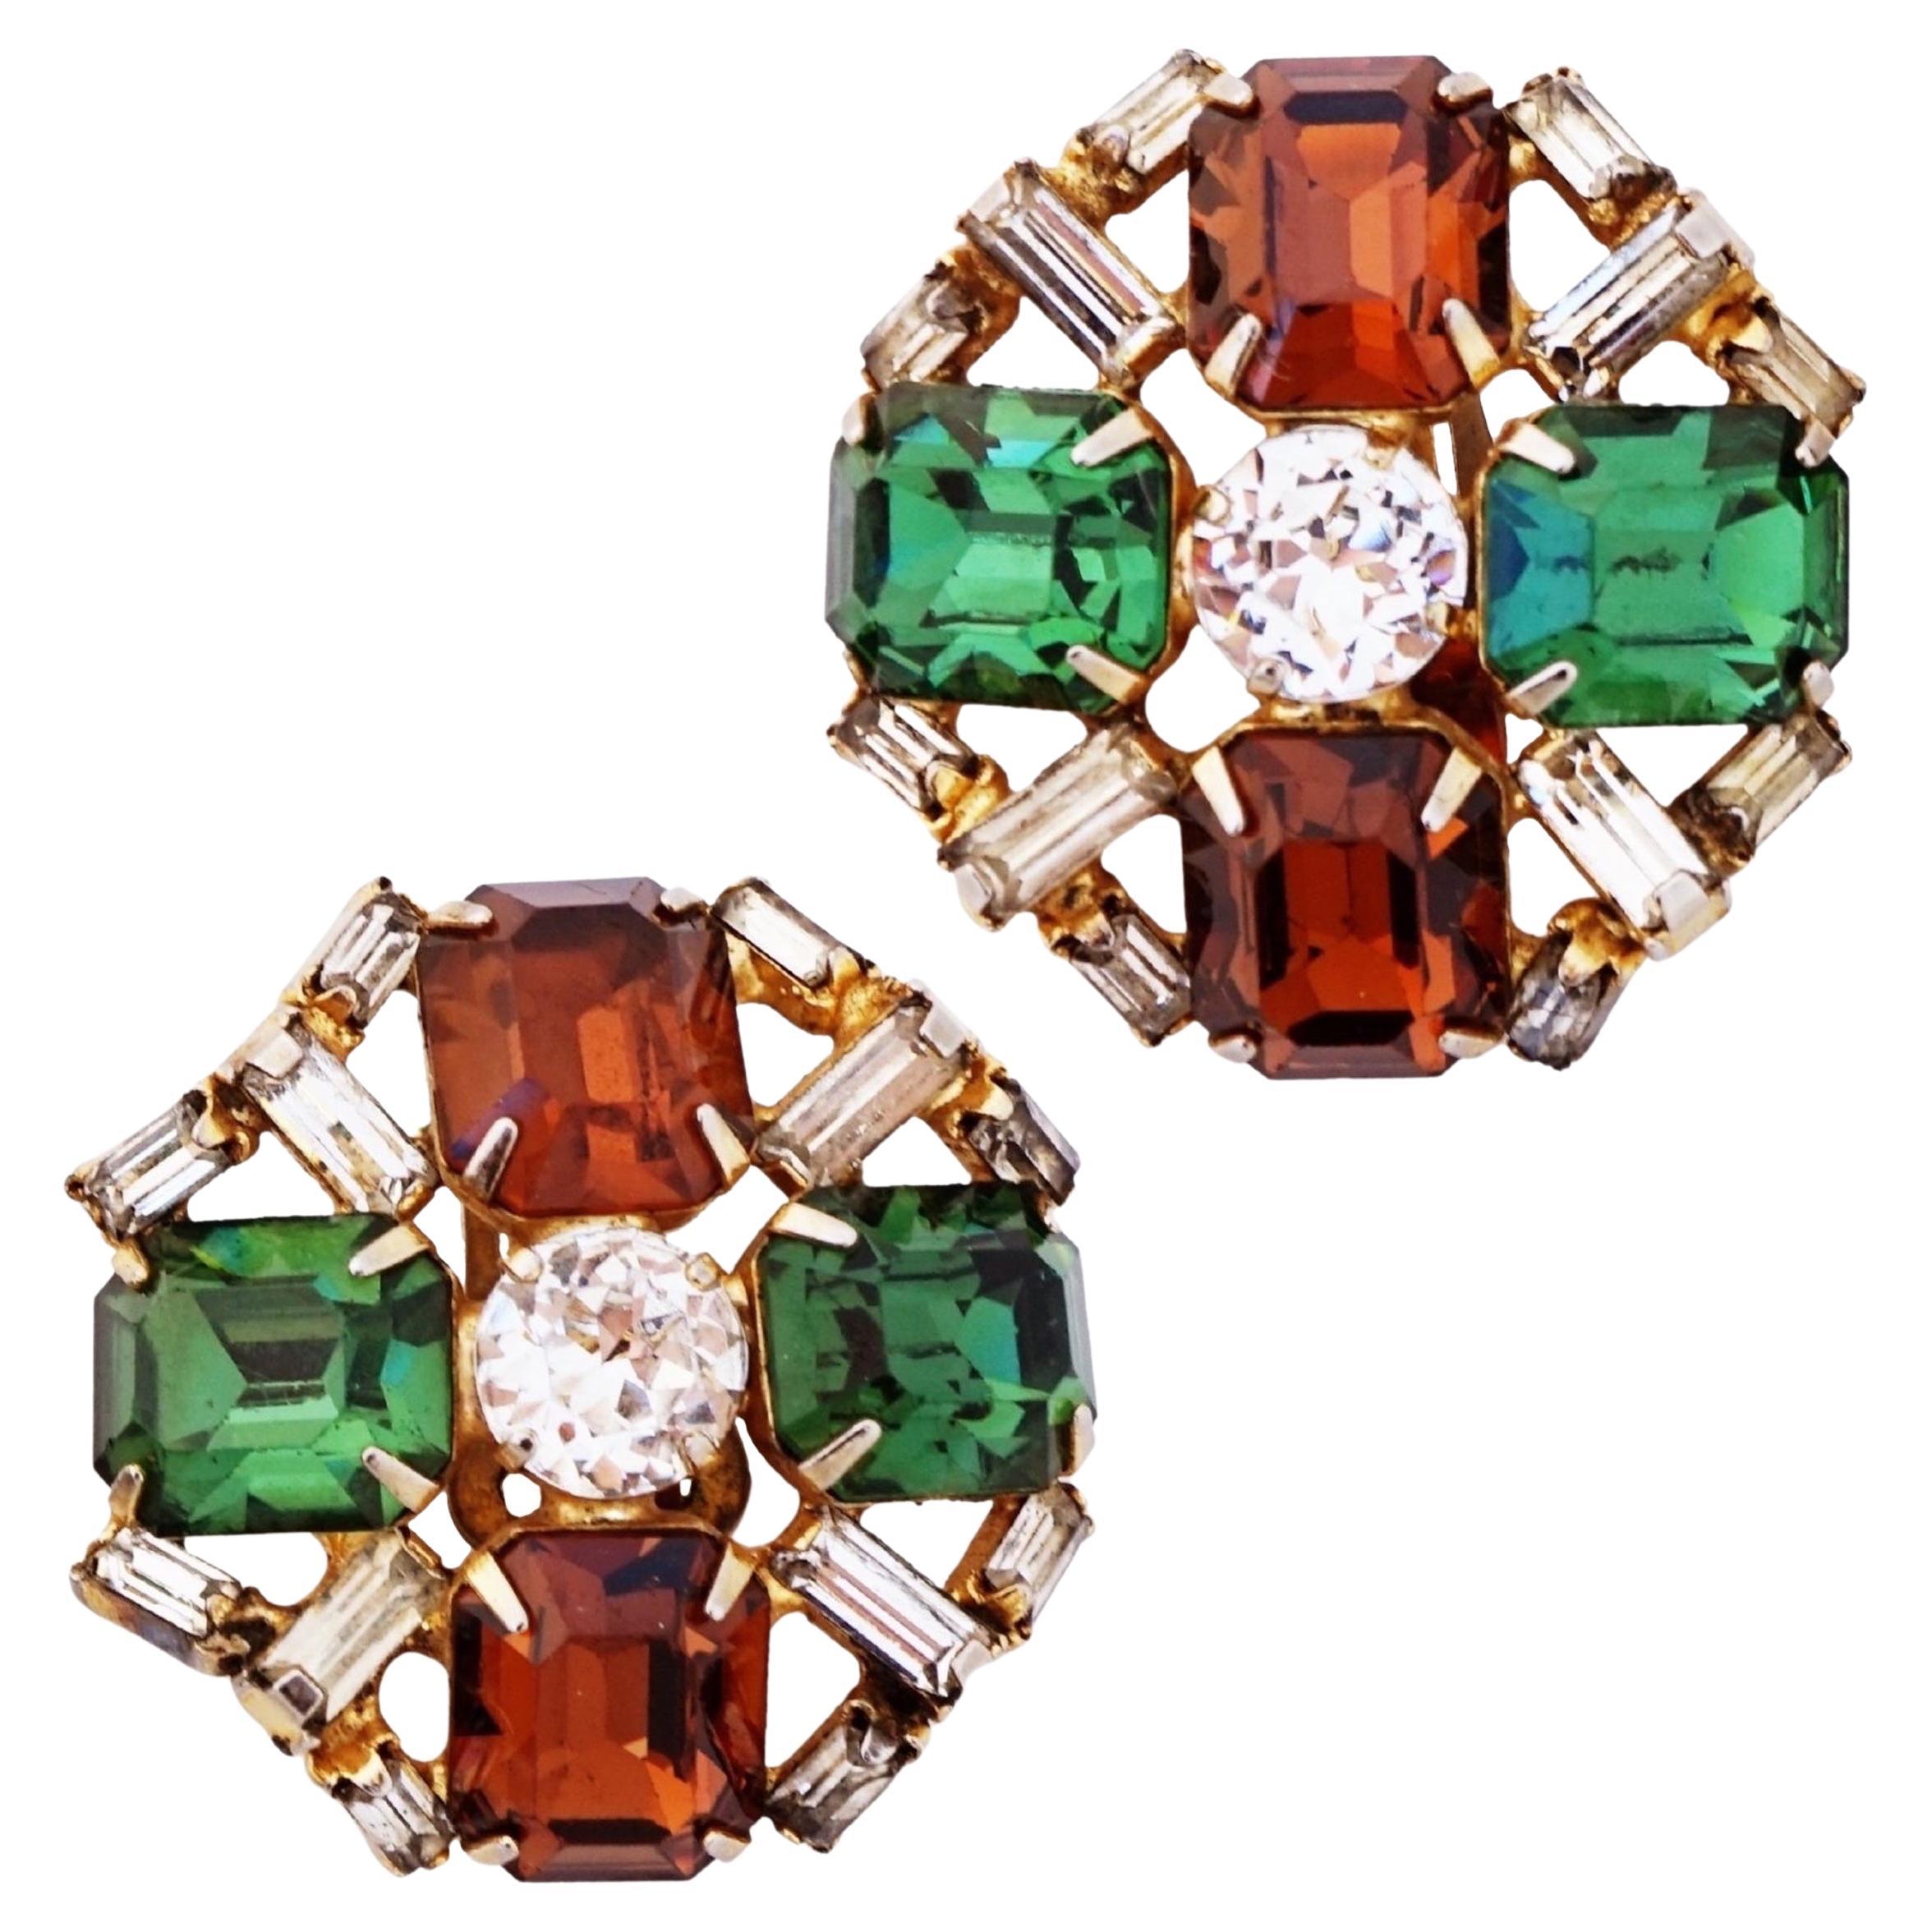 Smoked Topaz and Emerald Rhinestone Crystal Statement Earrings By Hobé, 1960s For Sale